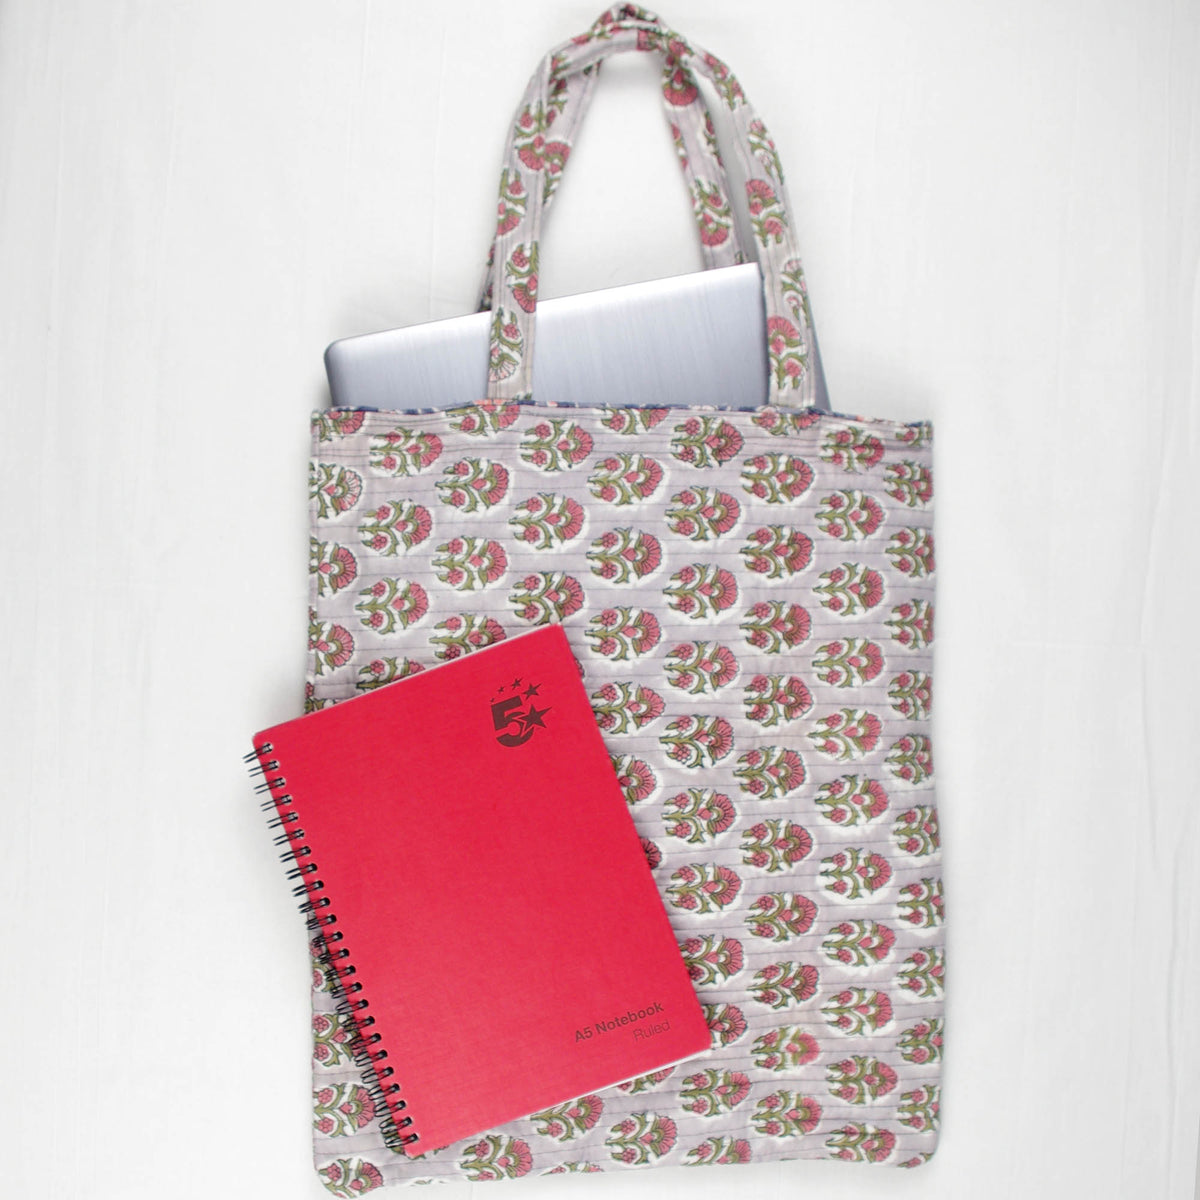 Cotton Quilted Hand Block Print Tote Bag -Grey Floral Motif